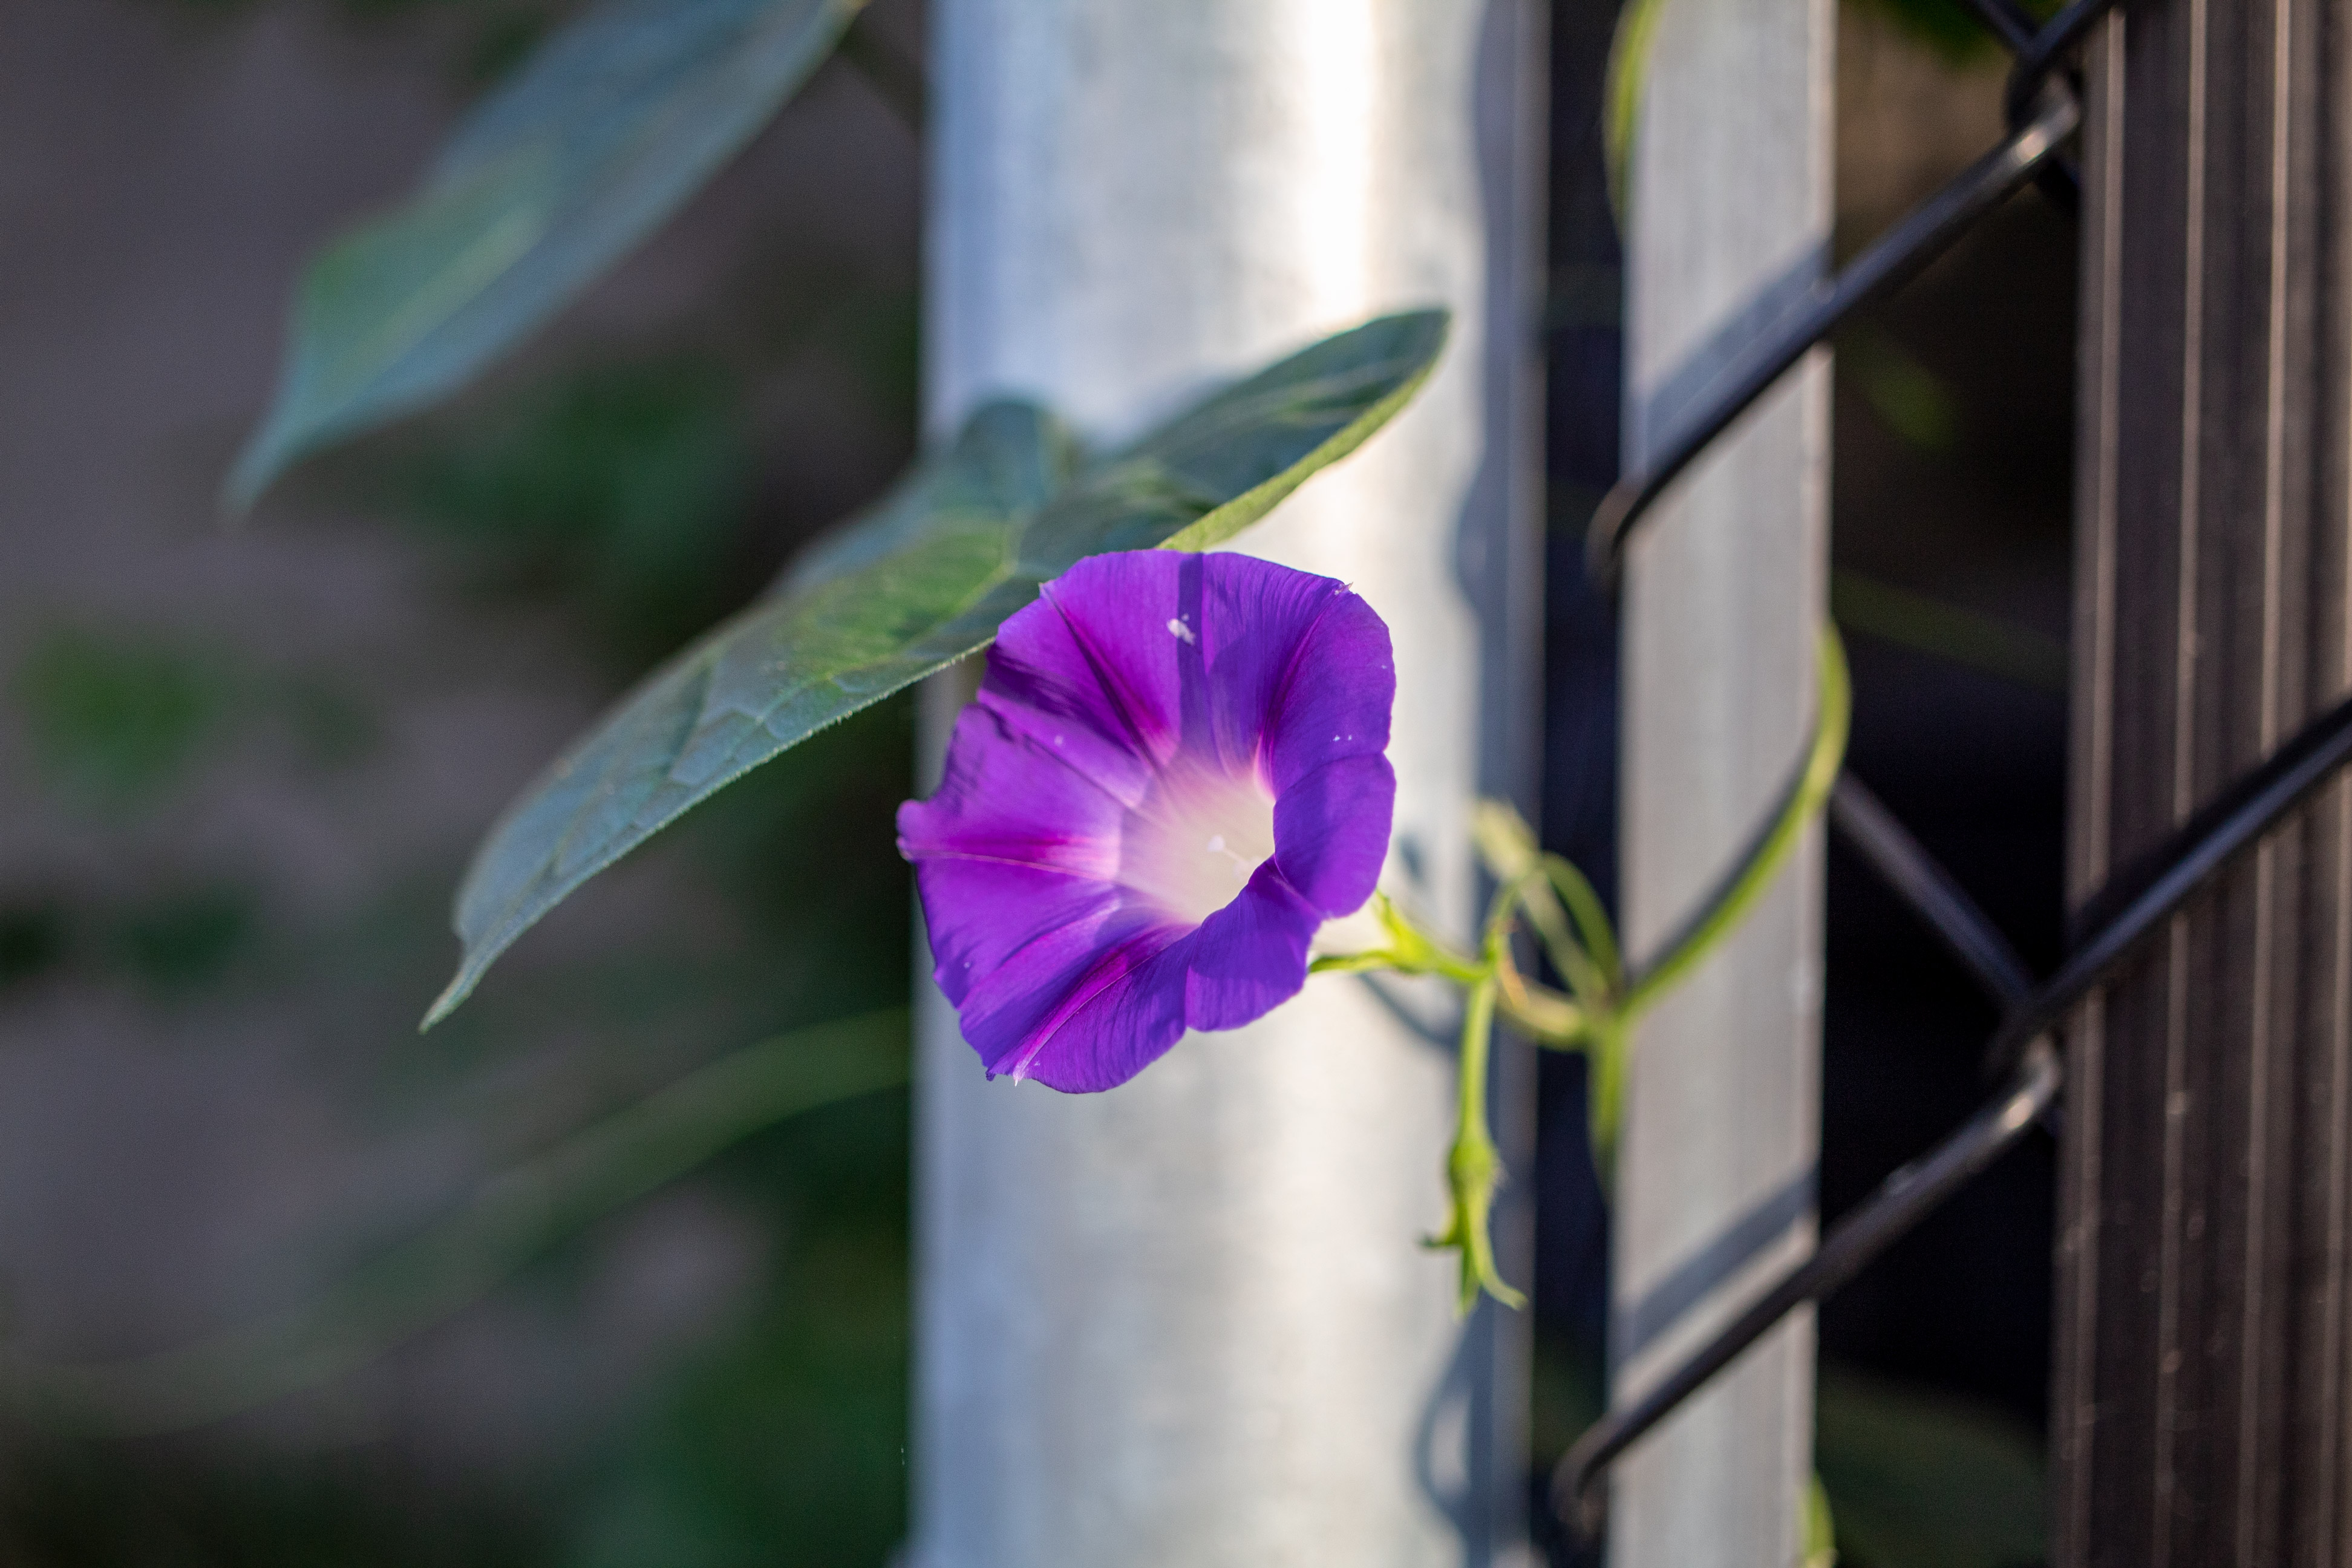 Purple flower with white centre growing of a fence with a single large heart-shaped leaf